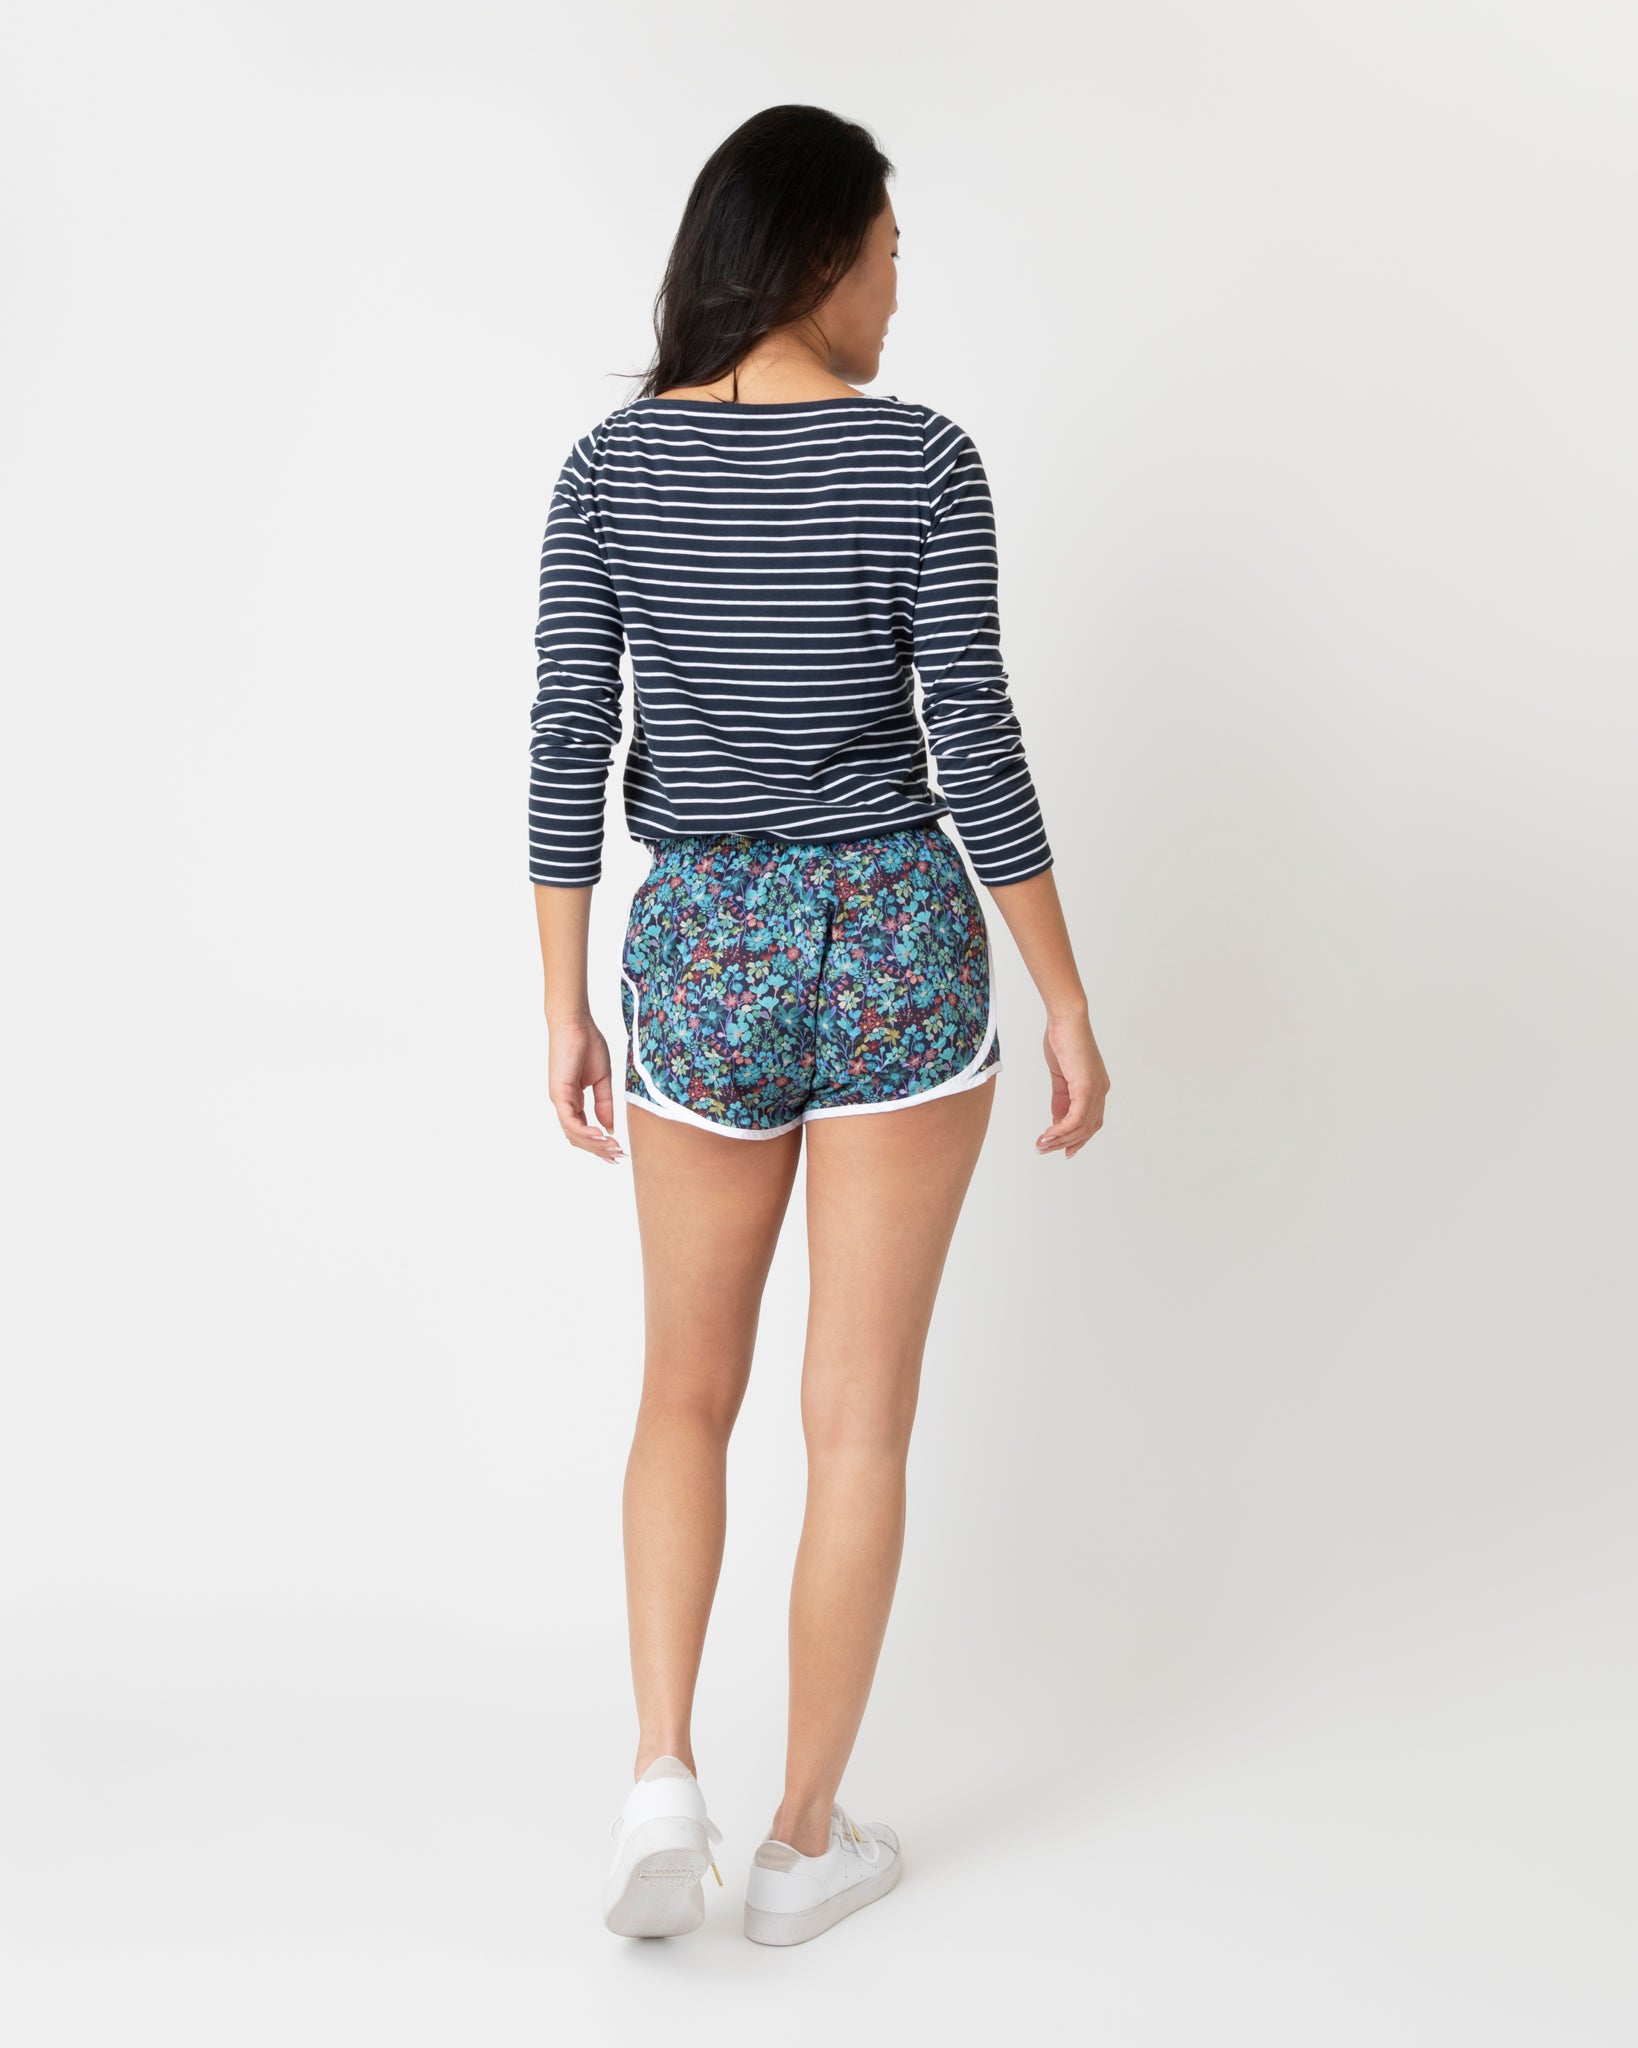 Track Short in Navy Multi Dreams Of Summer Liberty Fabric